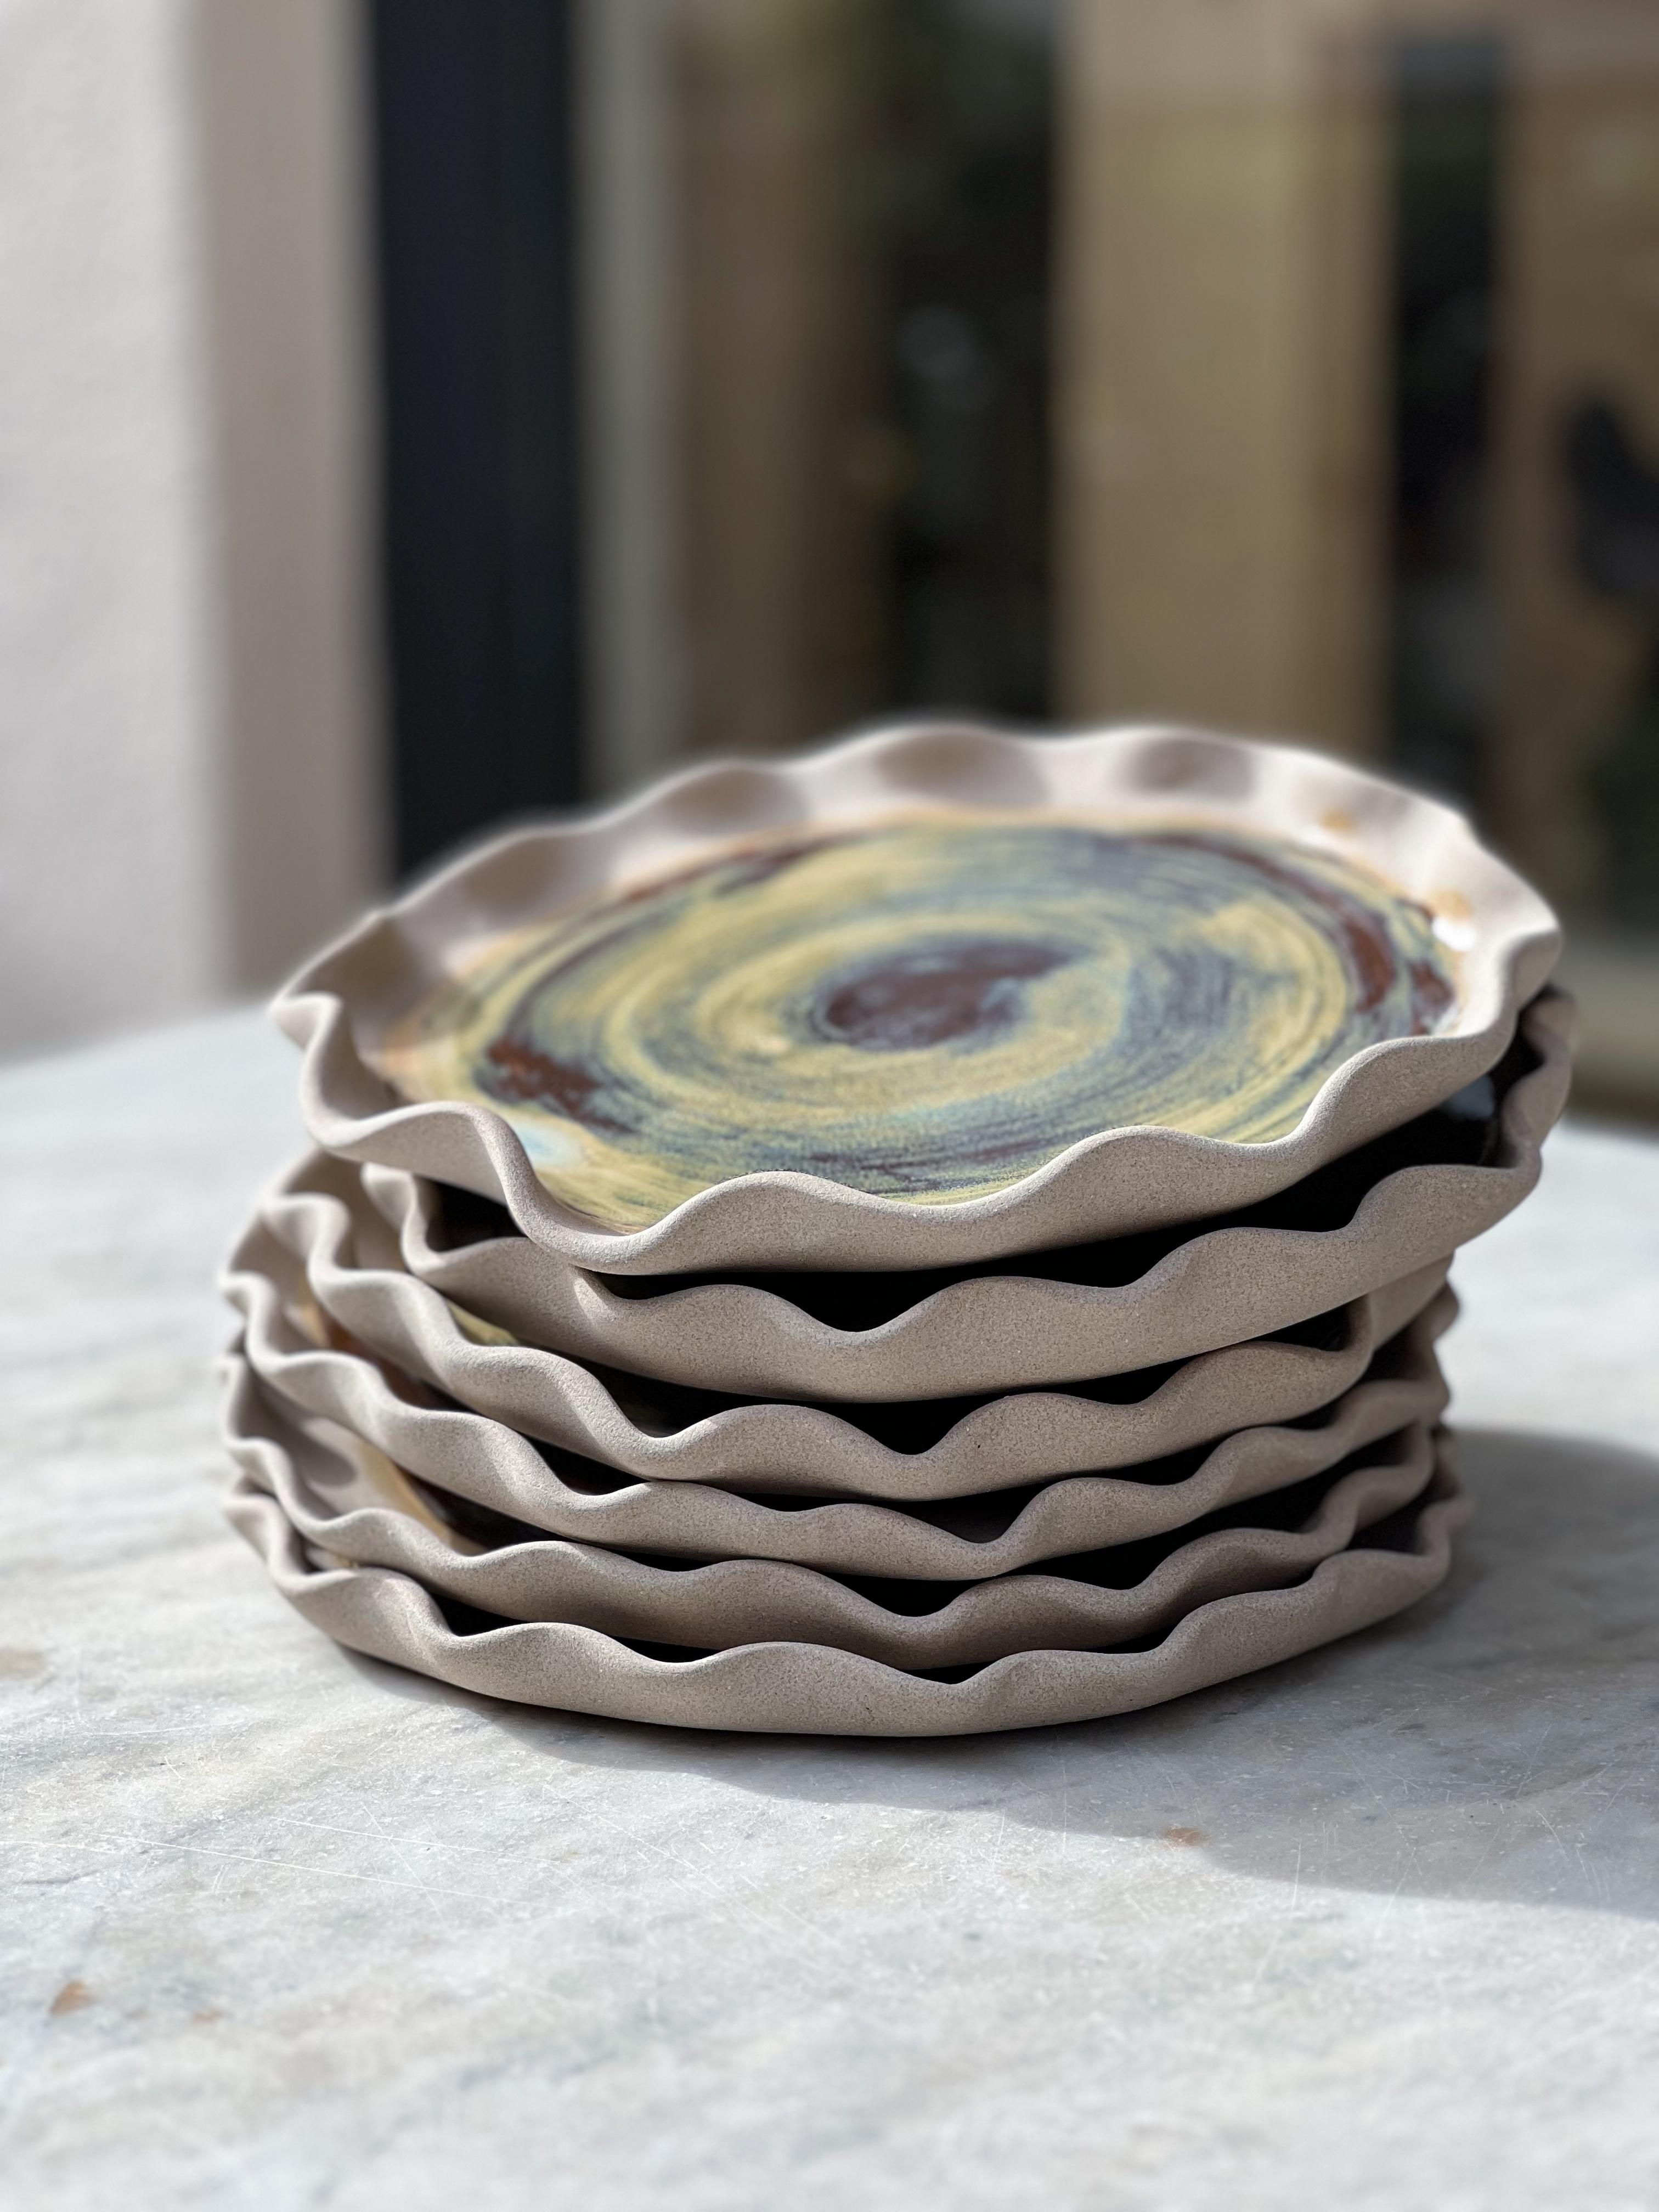 Set of 6 Waves of Aegean Plate by Güler Elçi
Dimensions: D 20 x H 1.7 cm
Materials: Stoneware Ceramic, Food Safe Glaze.

Güler Elçi is a ceramic artist based in Istanbul. In the light of her engineering career, she considers ceramics as a material